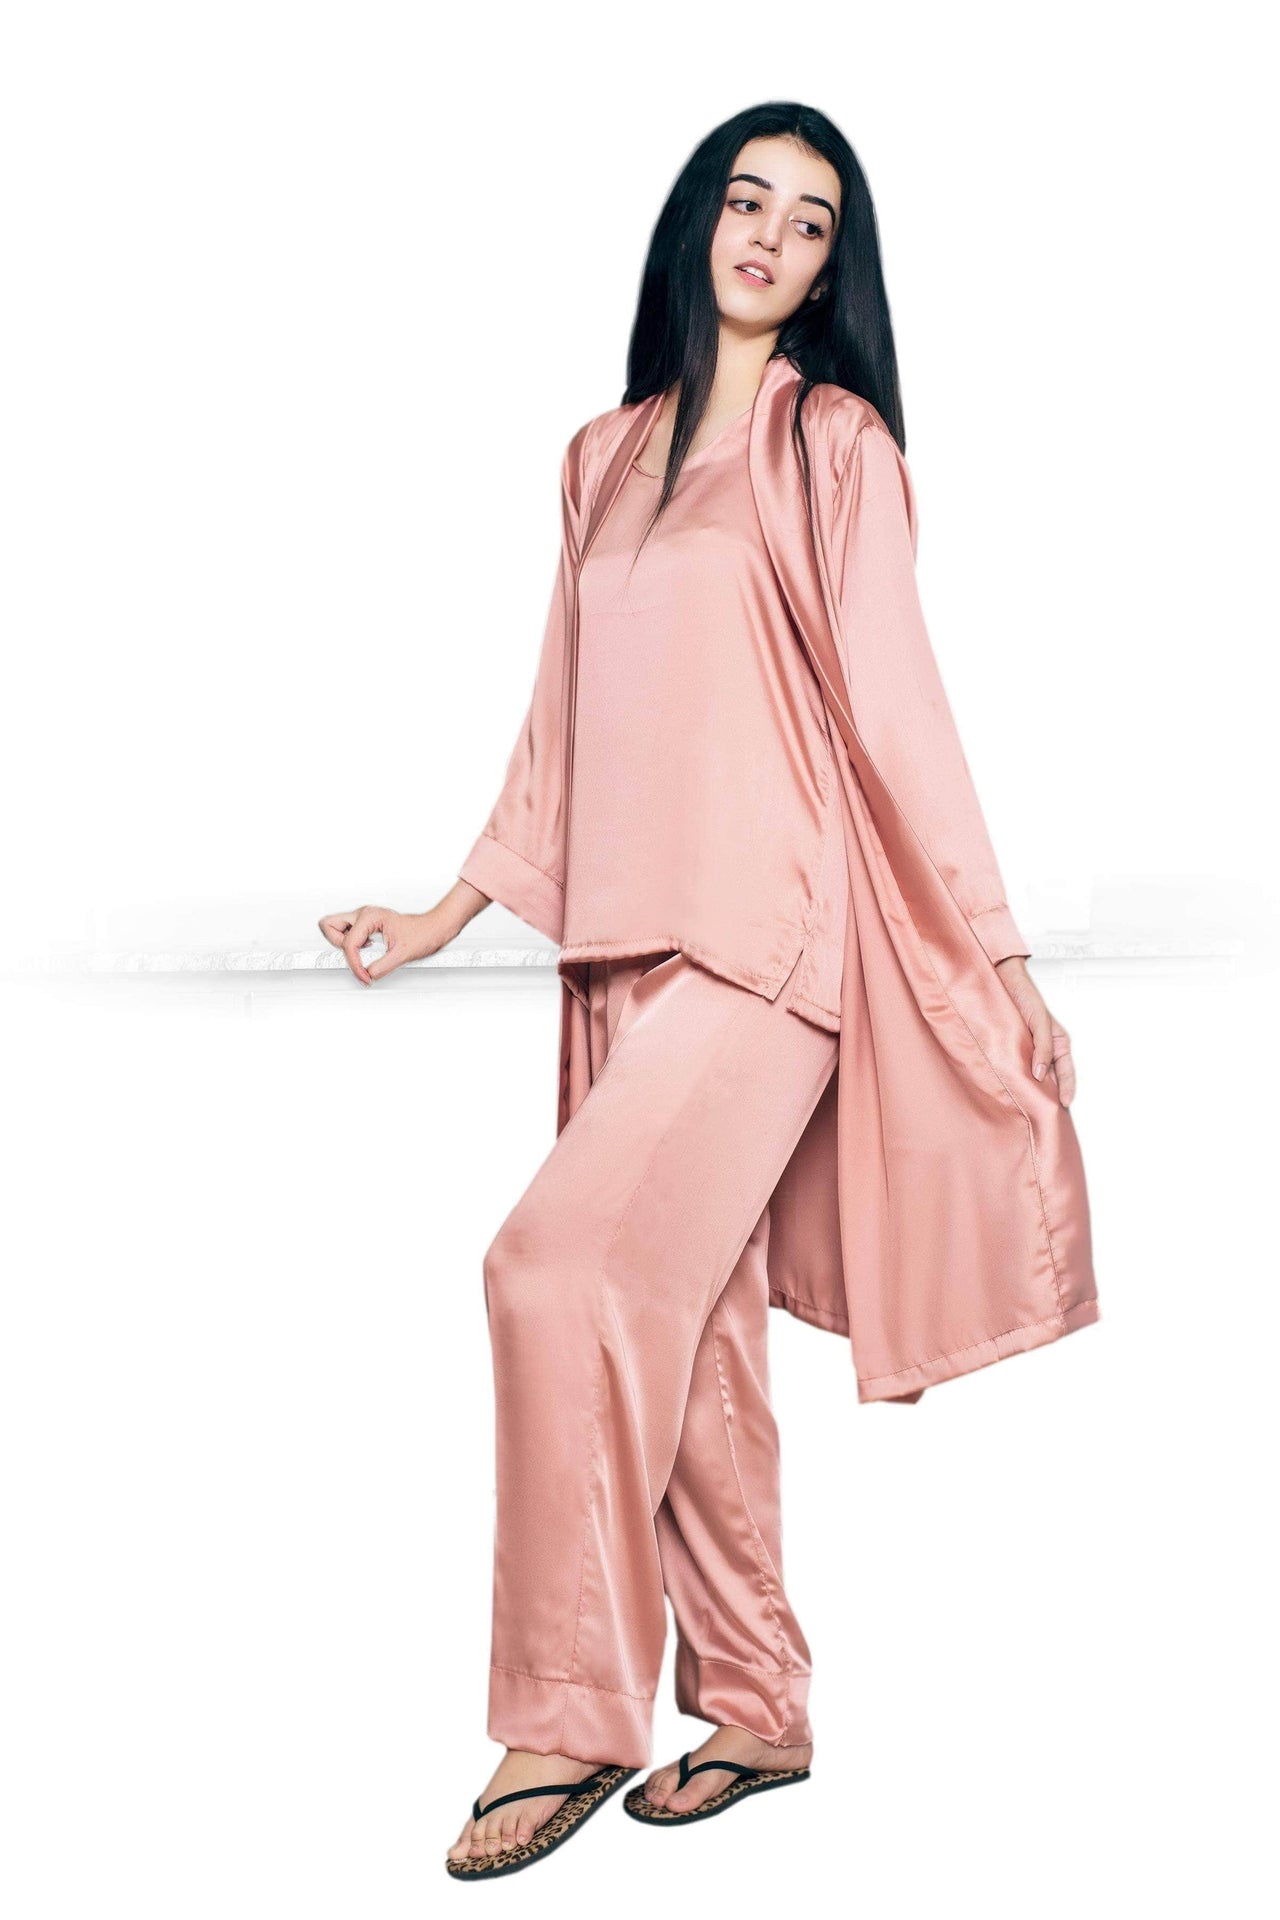 Elora by M Silk Robe Set Plain Silk 3 Piece Robe Set (Available in 7 Colors)